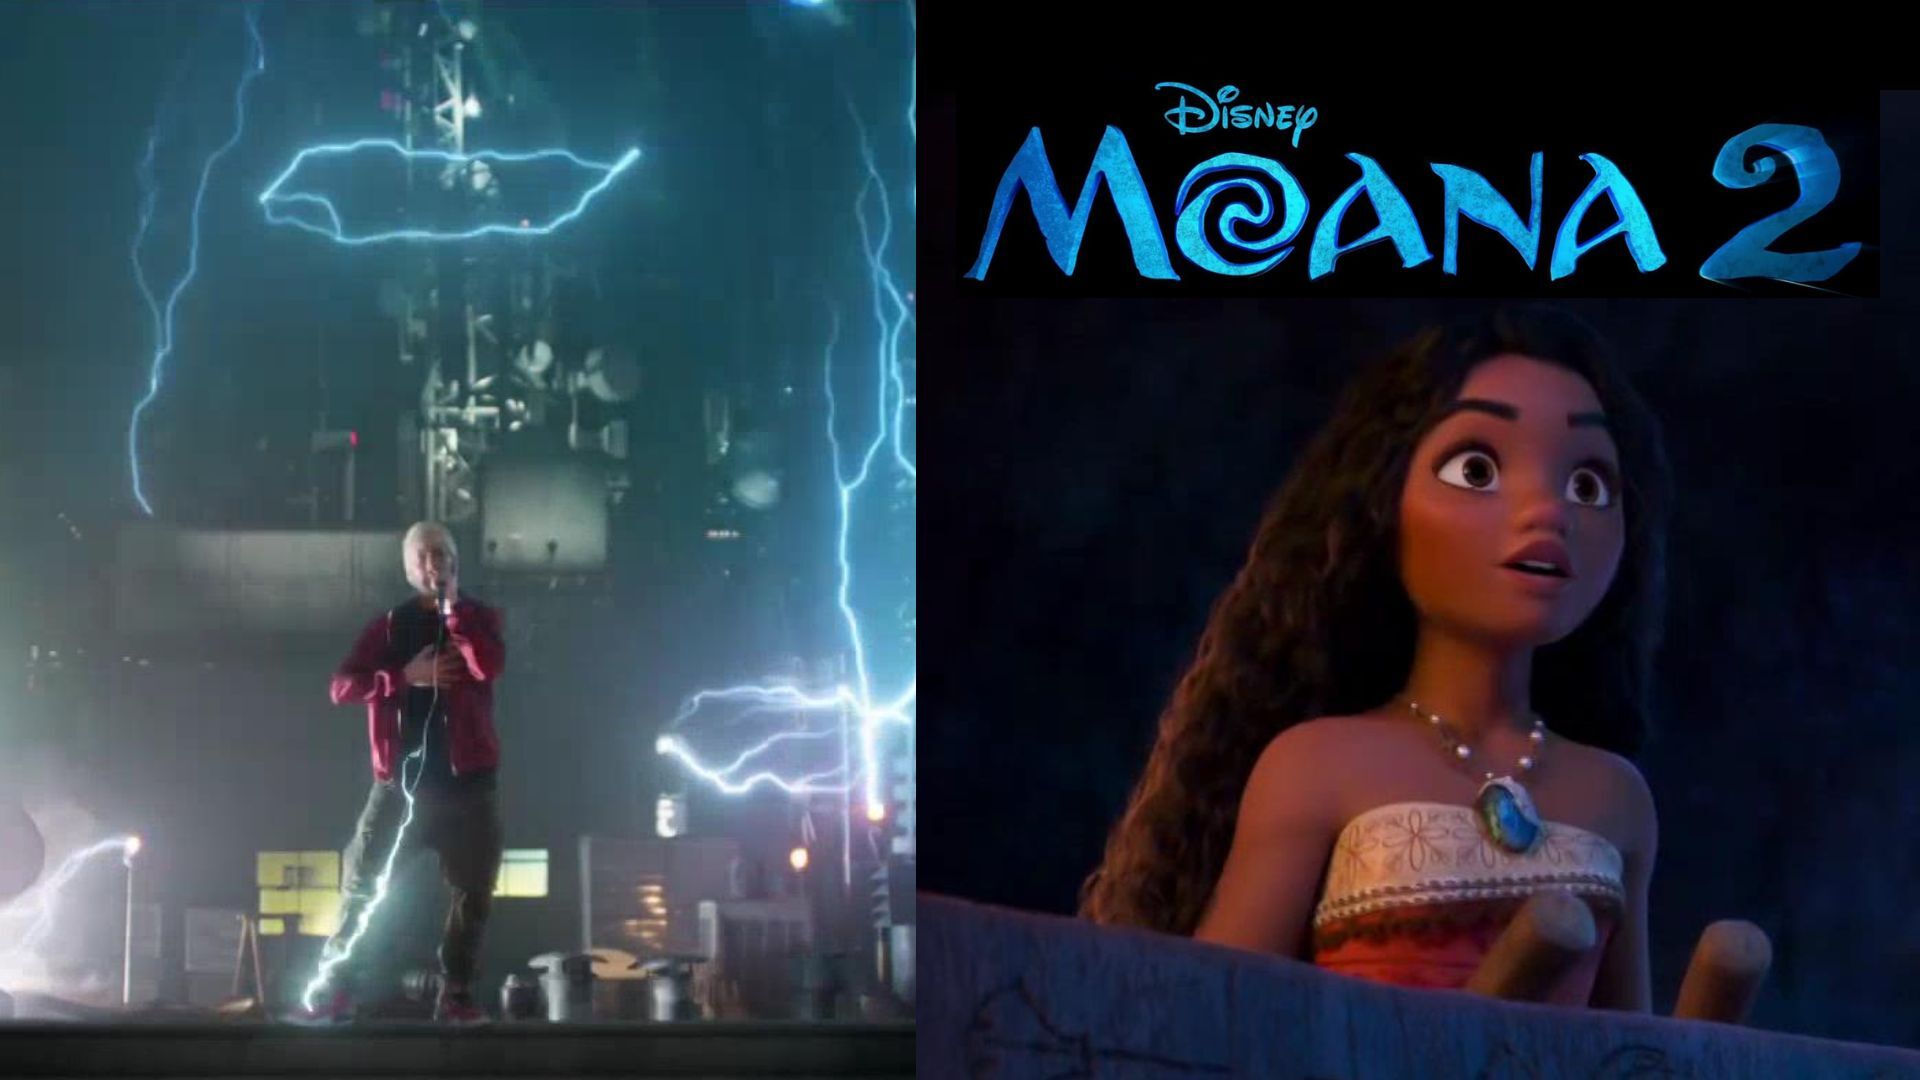 'Moana 2' is already breaking records by having the most viewed trailer in Disney history